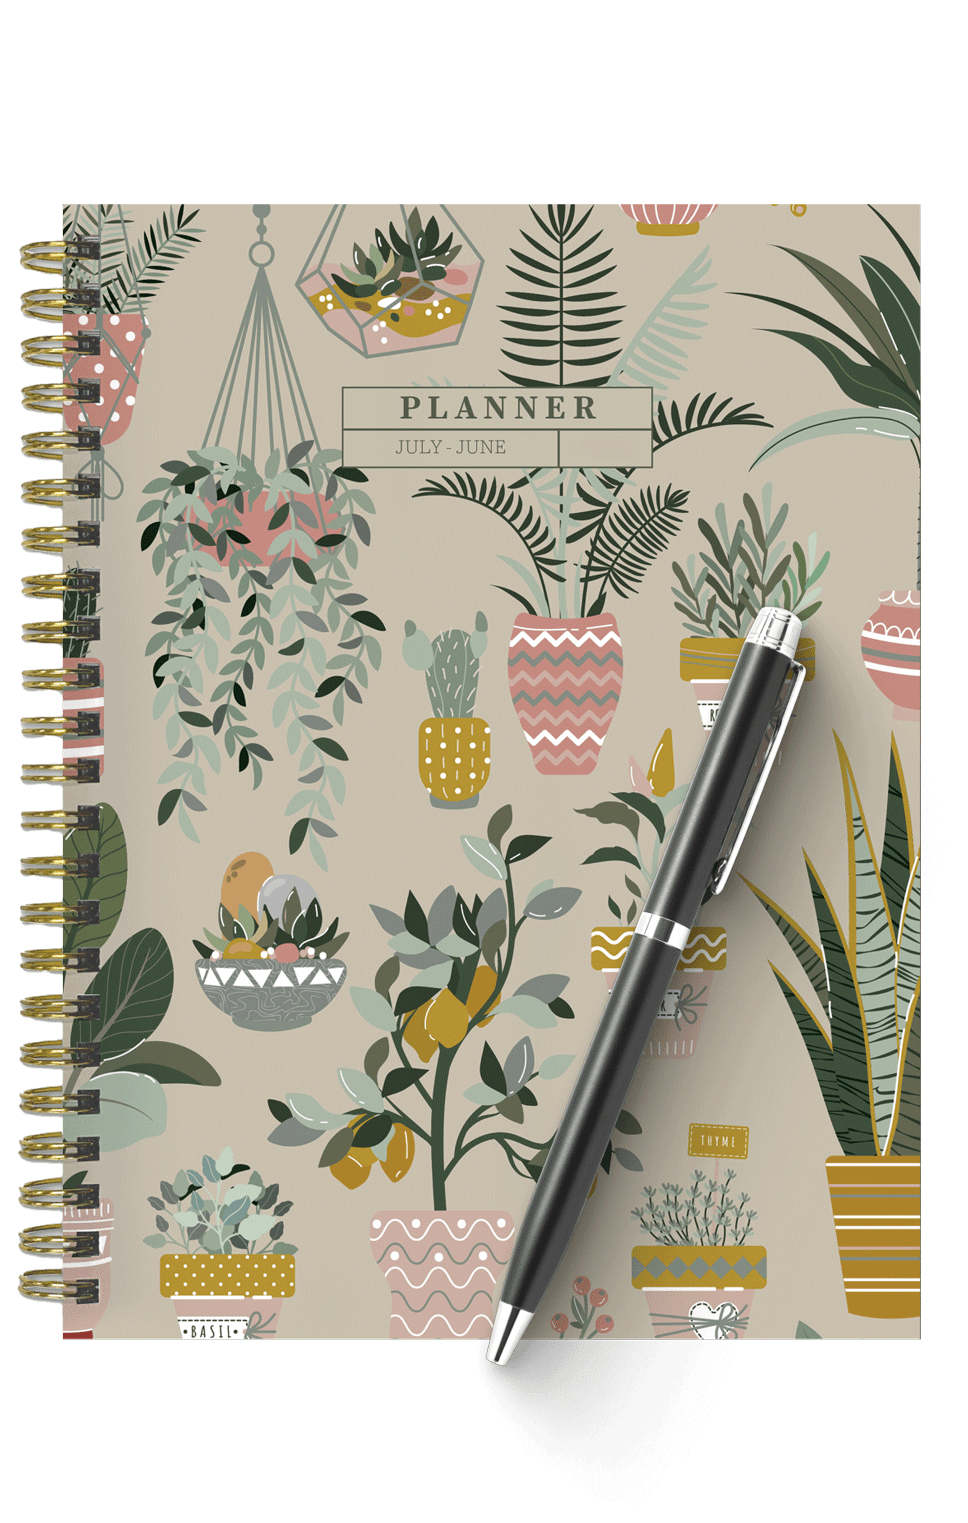 Planner and pen